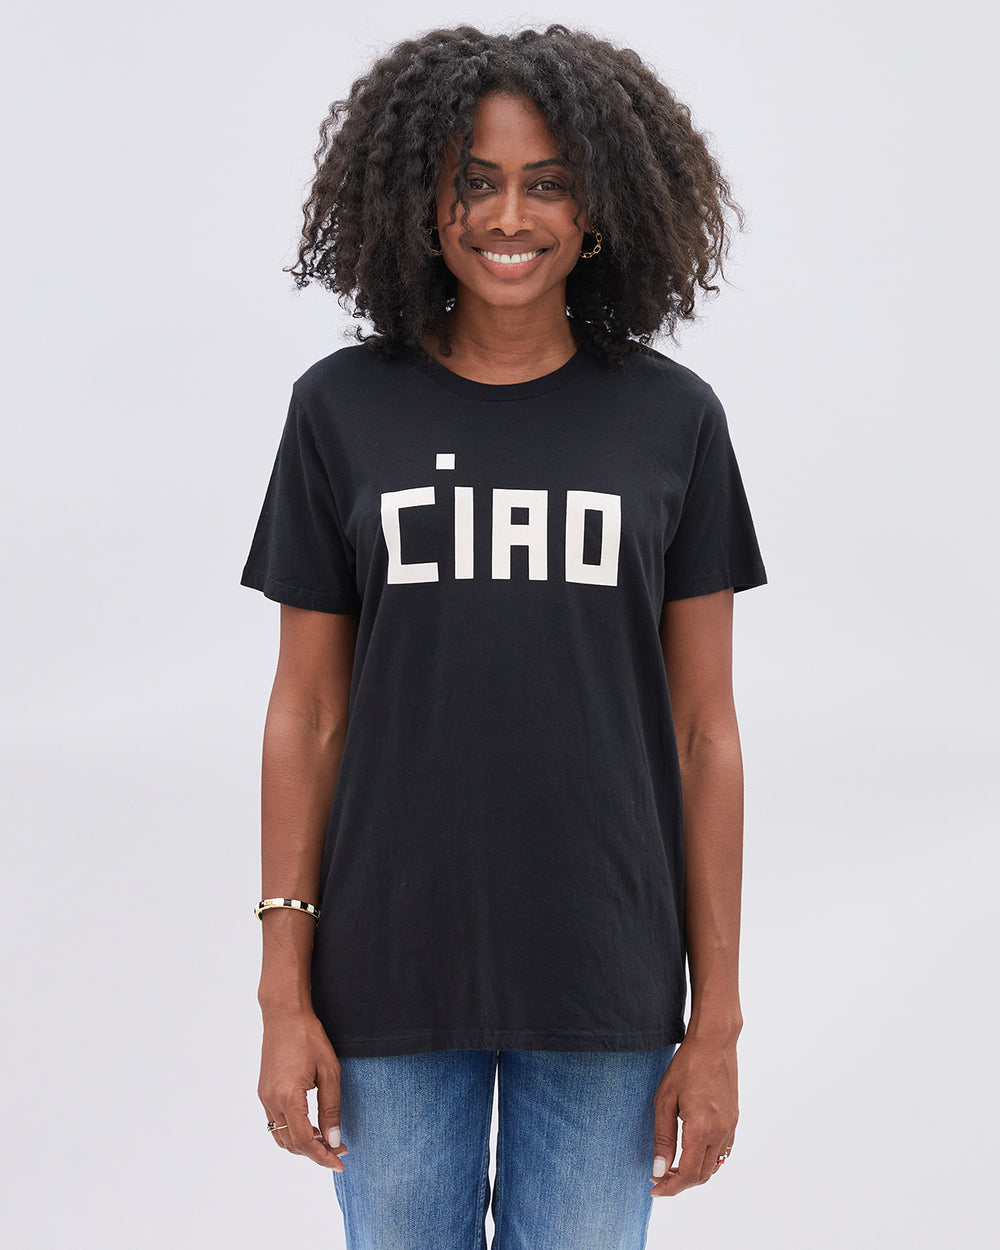 Mecca wearing the Ciao Original Tee in Black untucked with denim jeans.